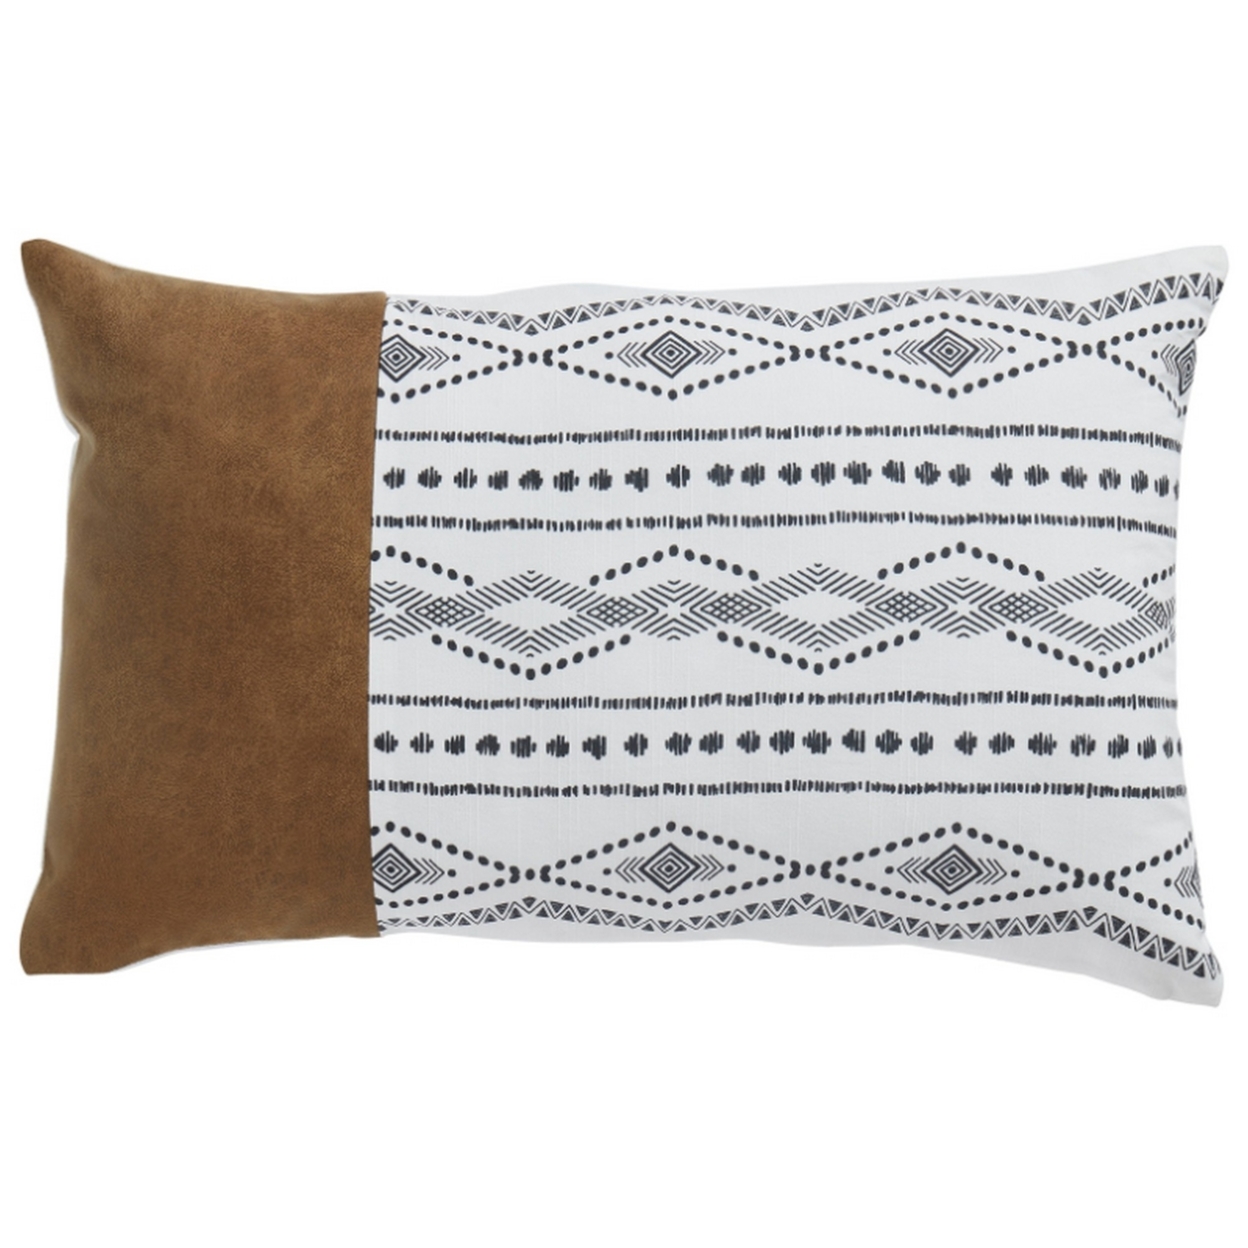 Pillow With Emroidered Global Design, Set Of 4, Brown And White- Saltoro Sherpi